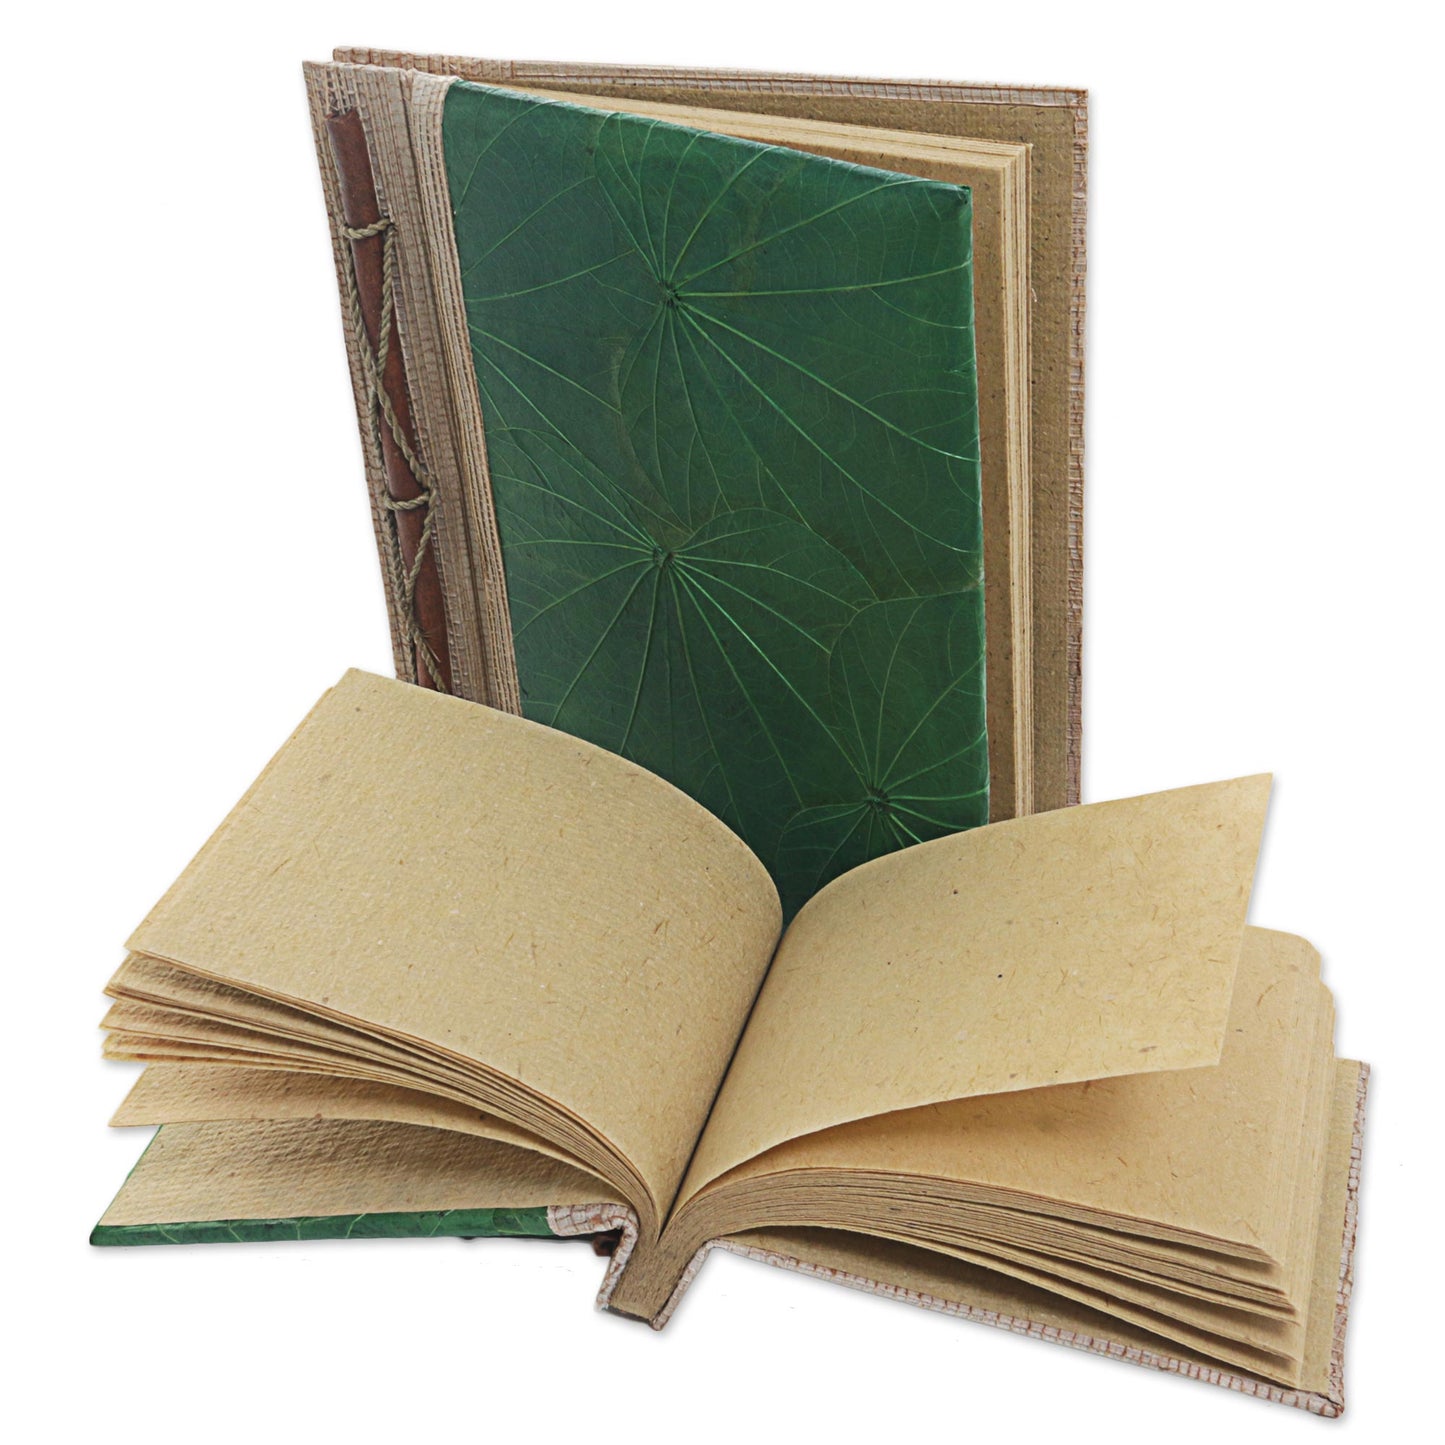 Autumn Spirit in Green Handcrafted Pair of Rice Paper Notebooks from Indonesia